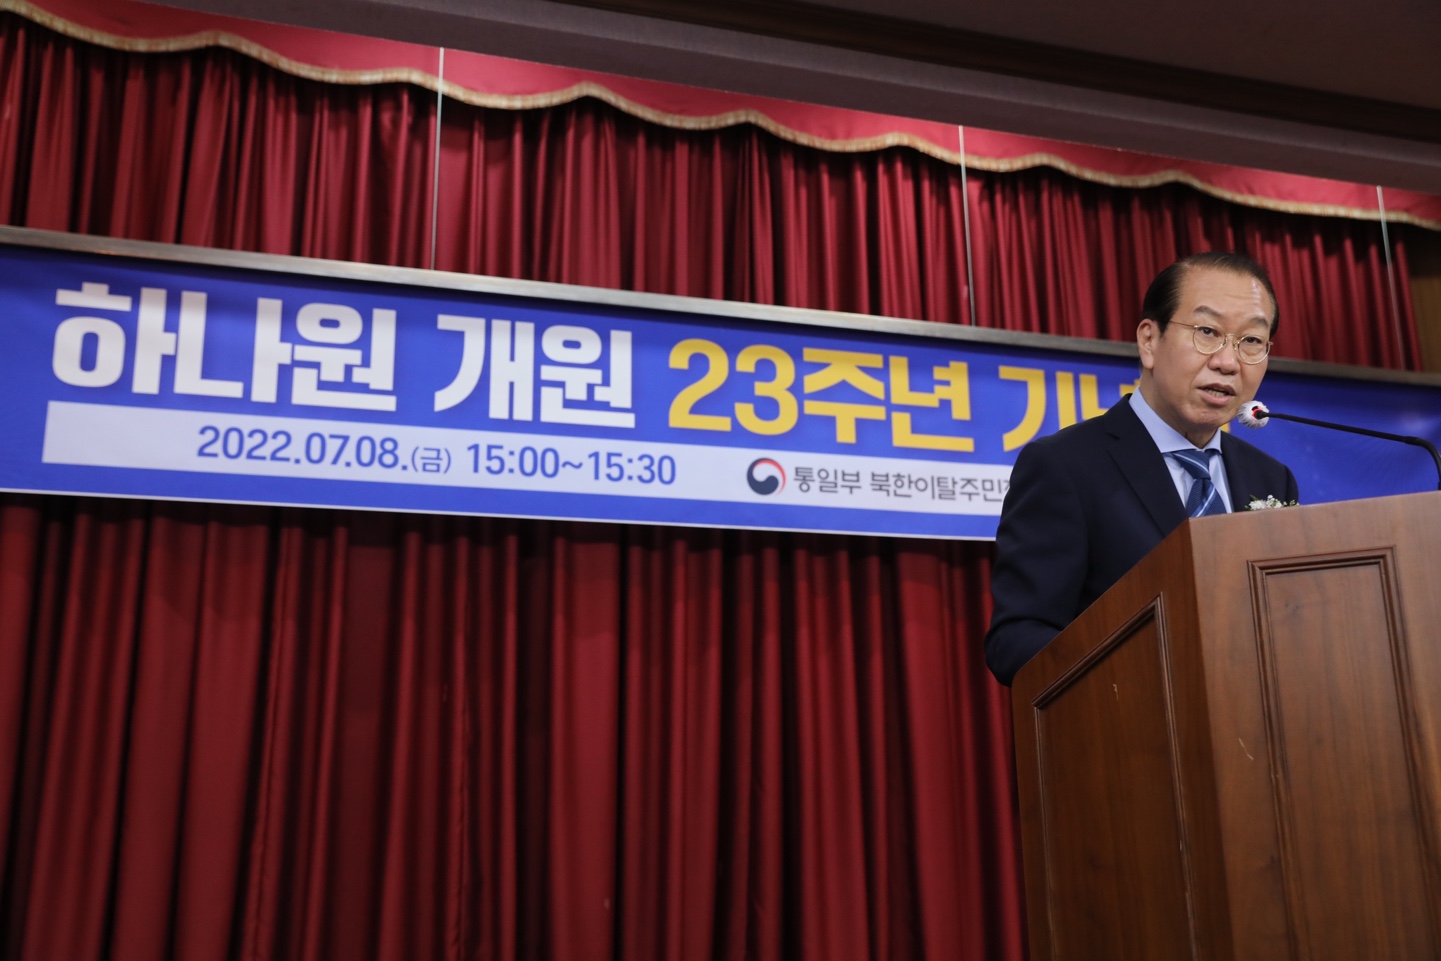 The 23rd Anniversary of the Settlement Support Center for North Korean Refugees